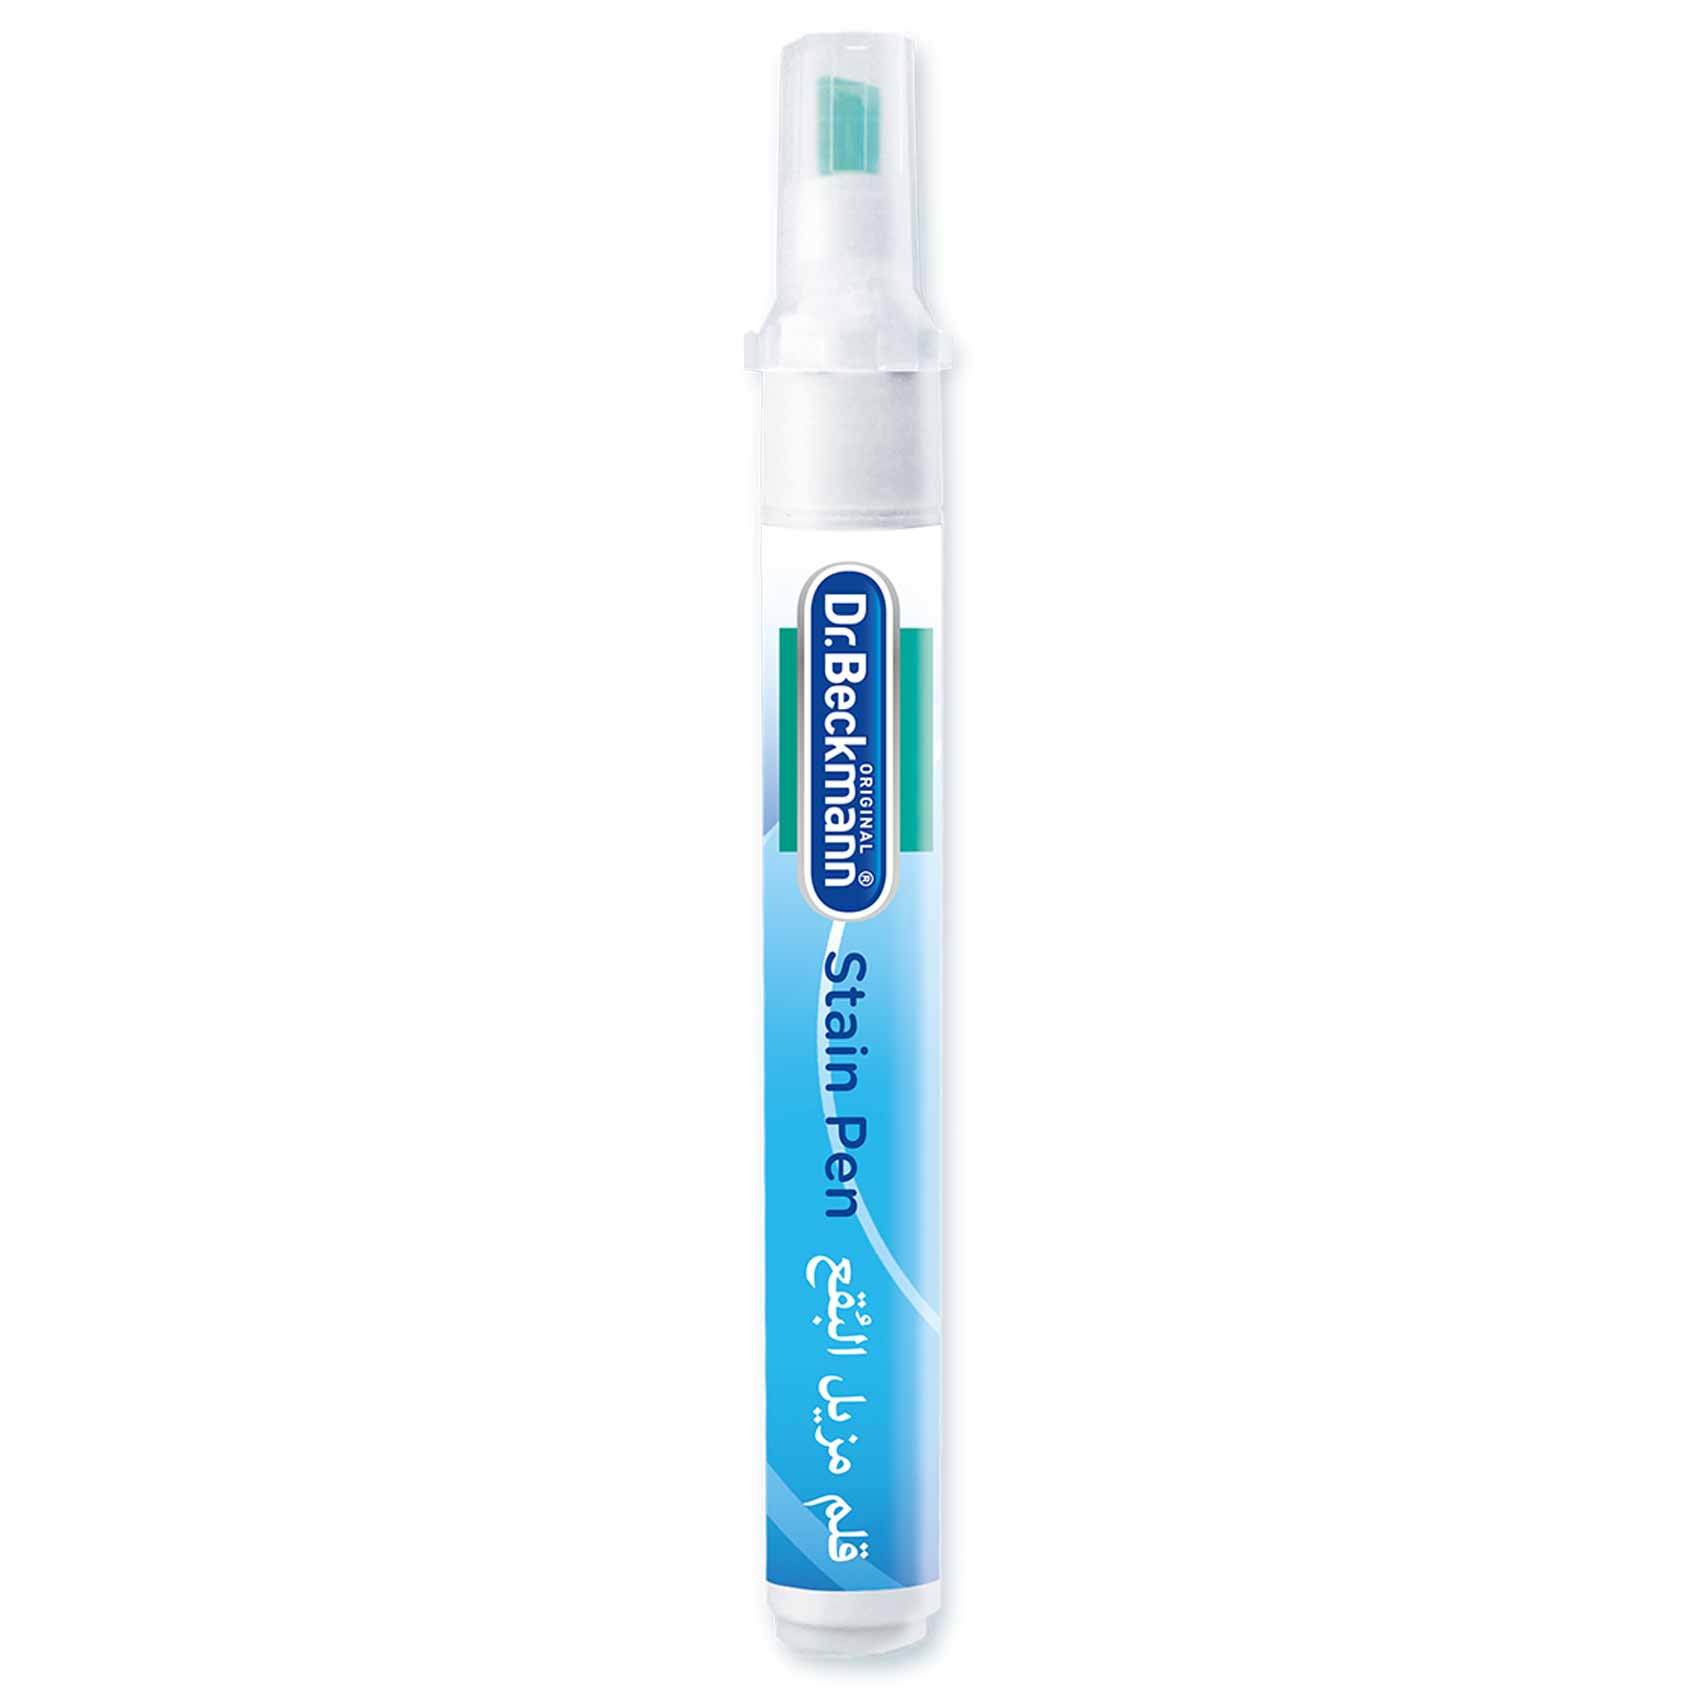 Liquid Dr Beckmann Instant Stain Remover Pen, For Cloth Cleaning, Packaging  Size: 9ml